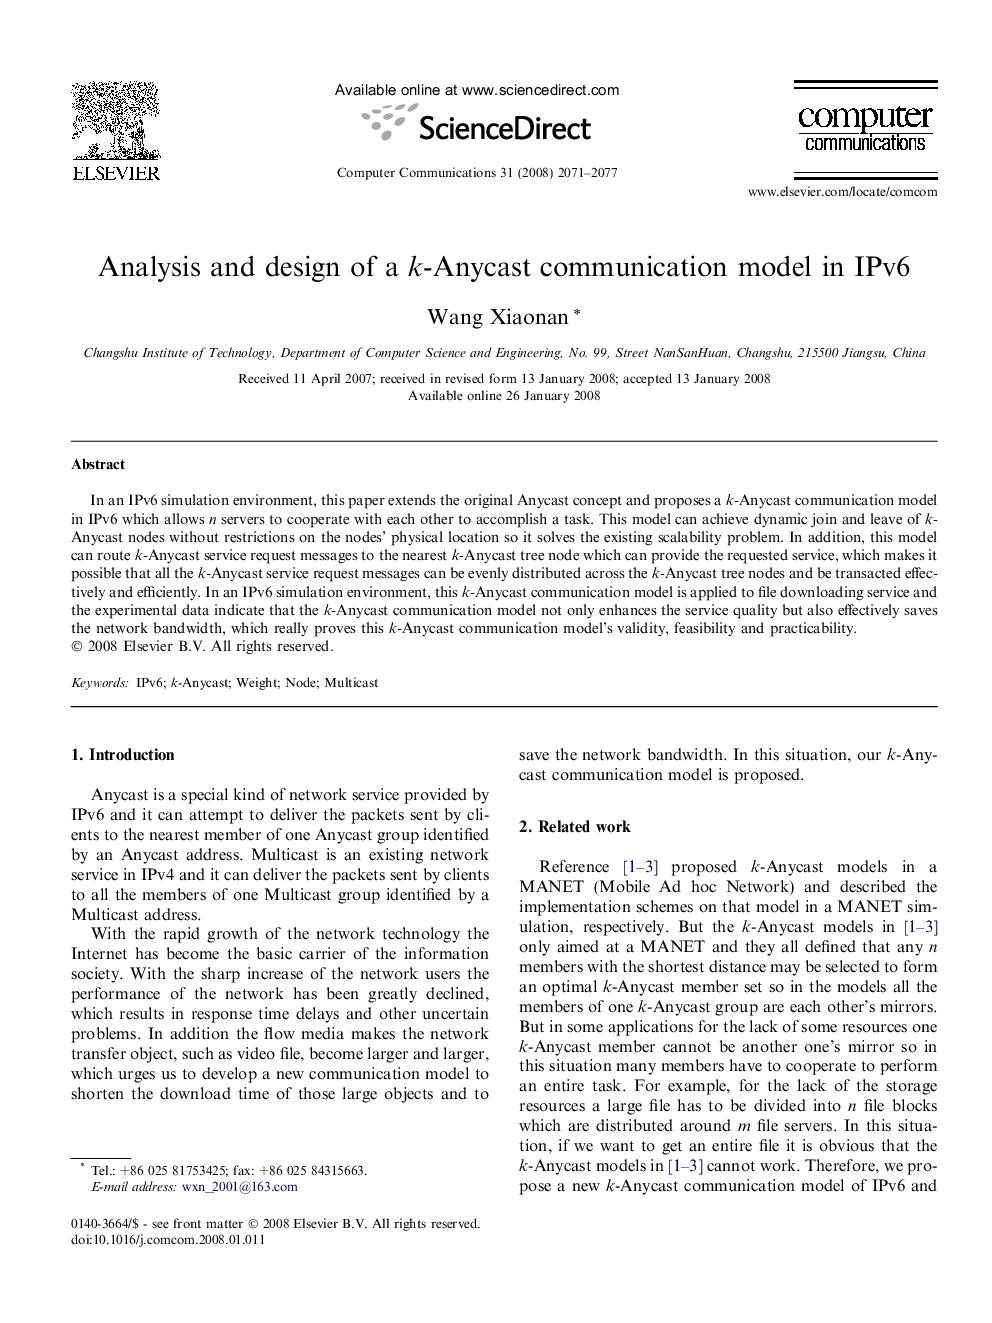 Analysis and design of a k-Anycast communication model in IPv6